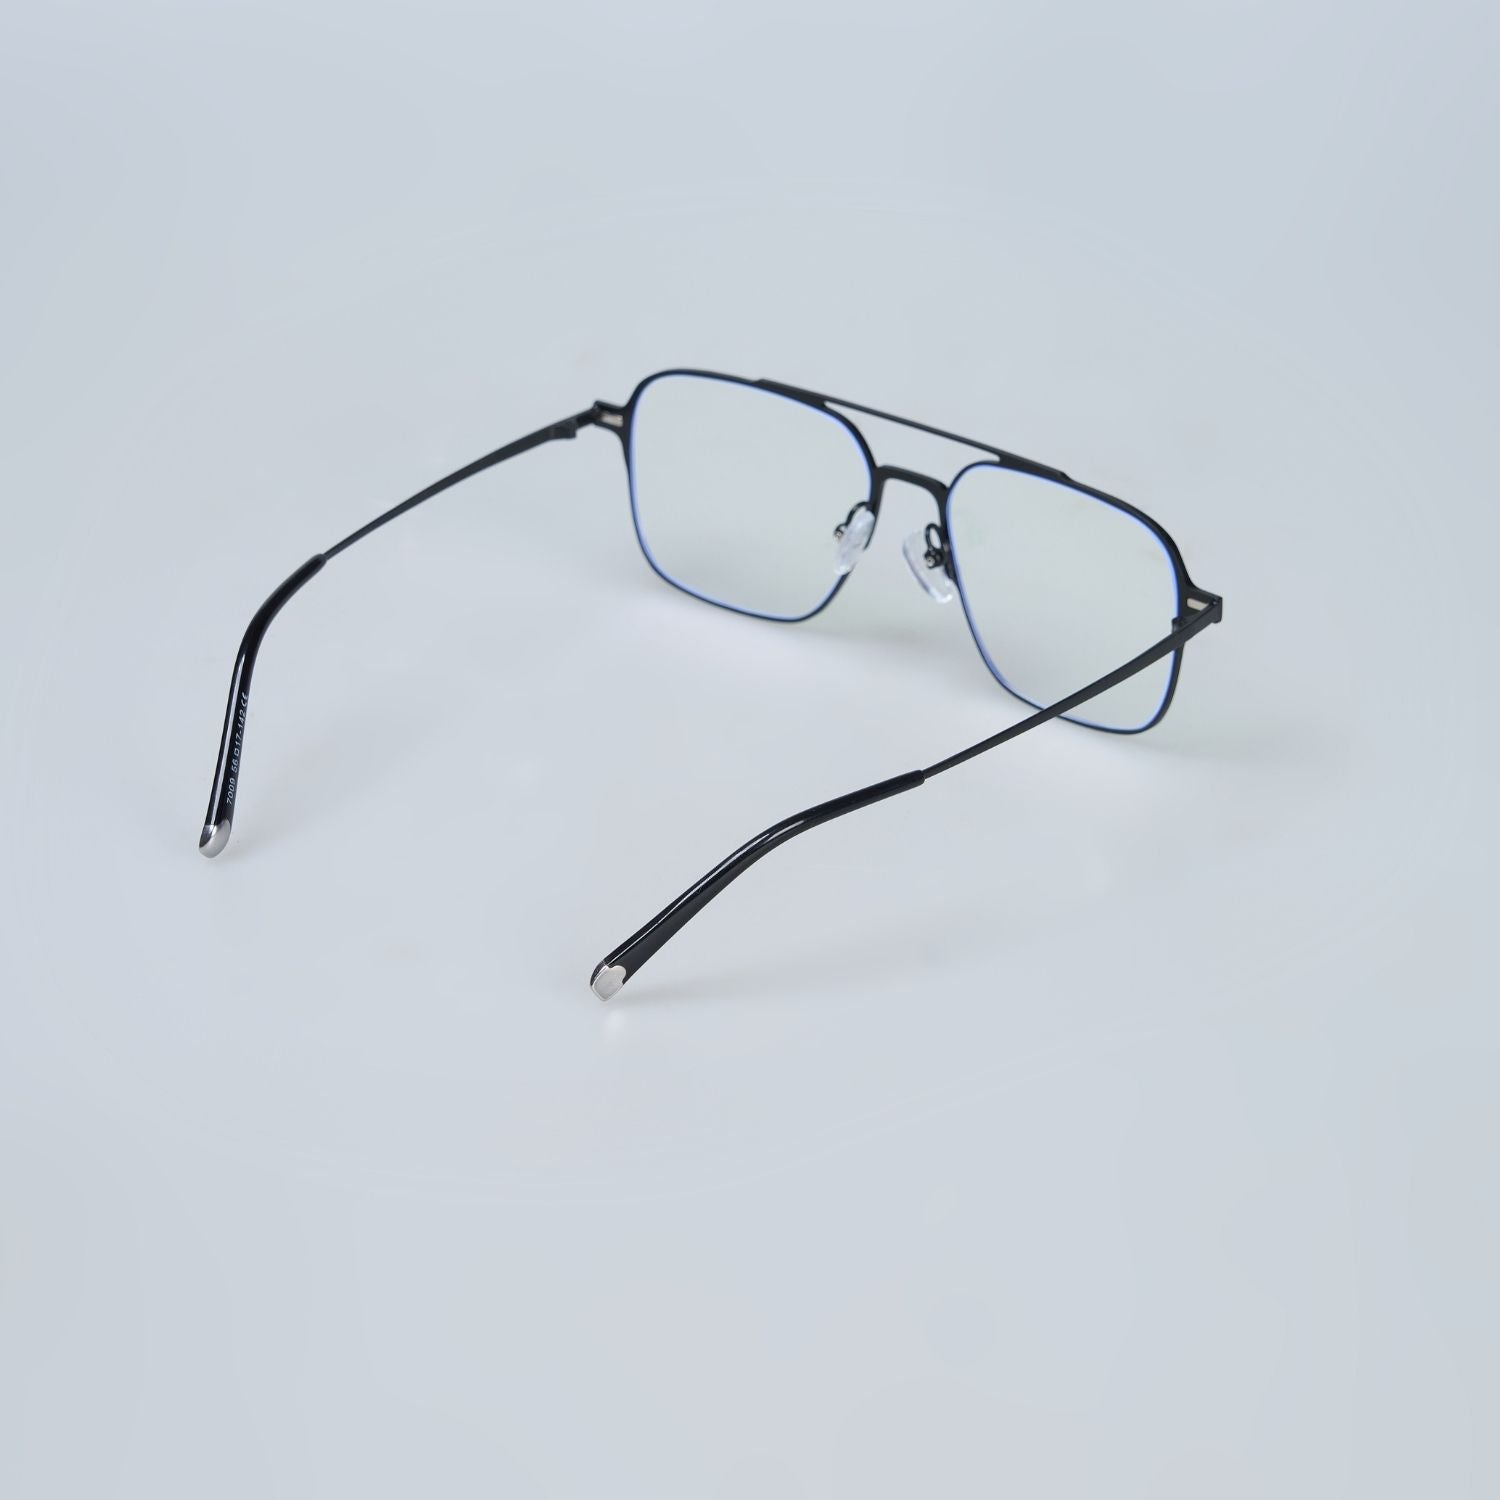 Day night changeable lens eyeshade with detachable clips for men and women, back view.